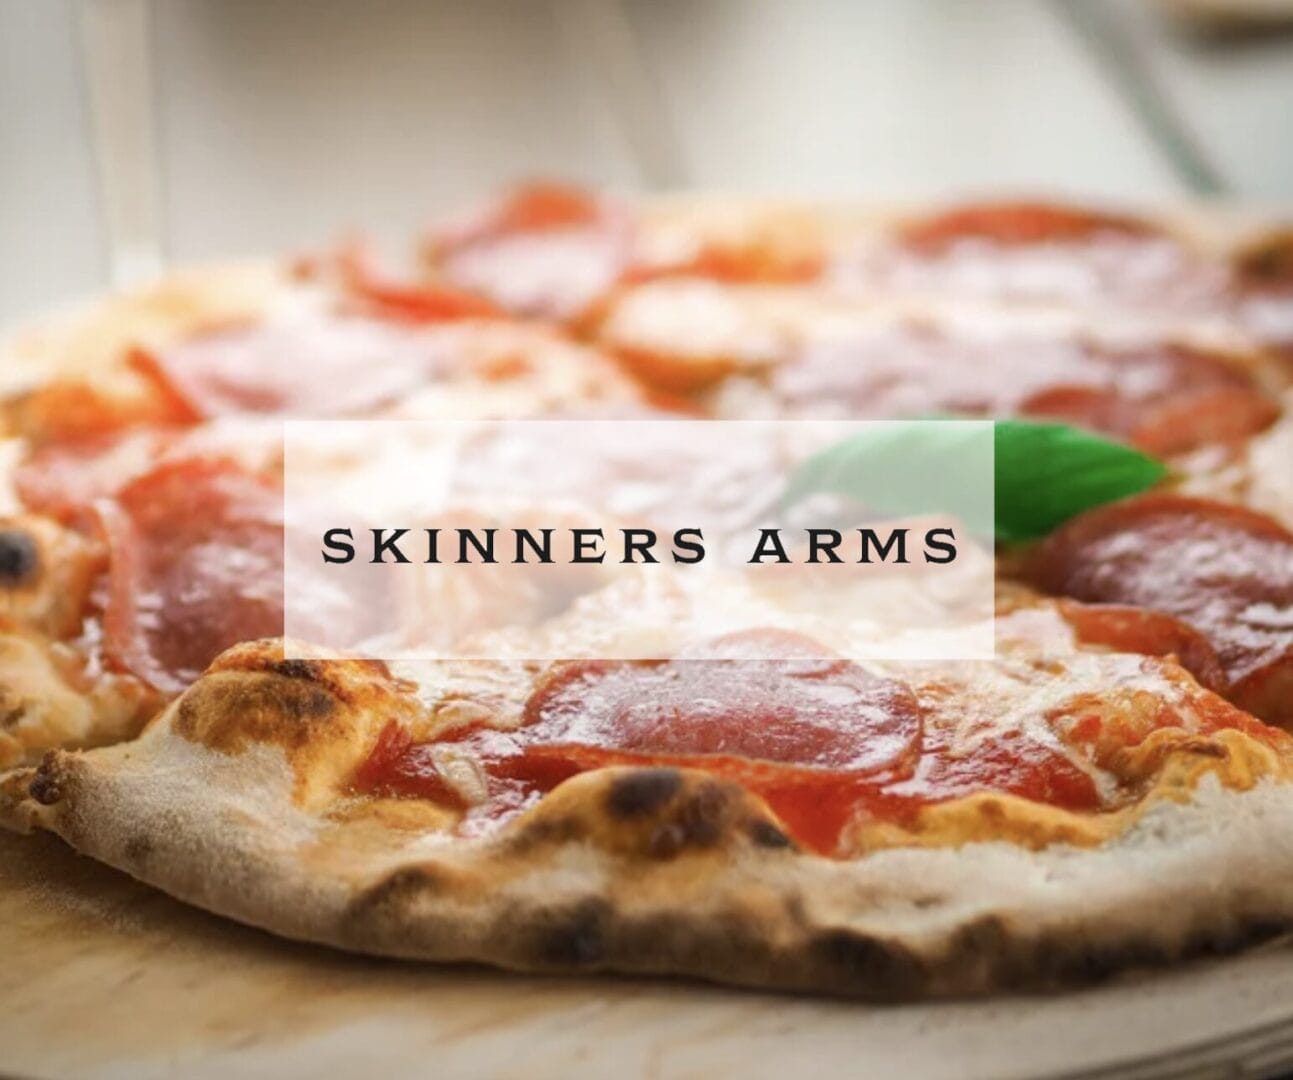 Best Pubs In Essex With Food - Dine At The Skinners Arms !